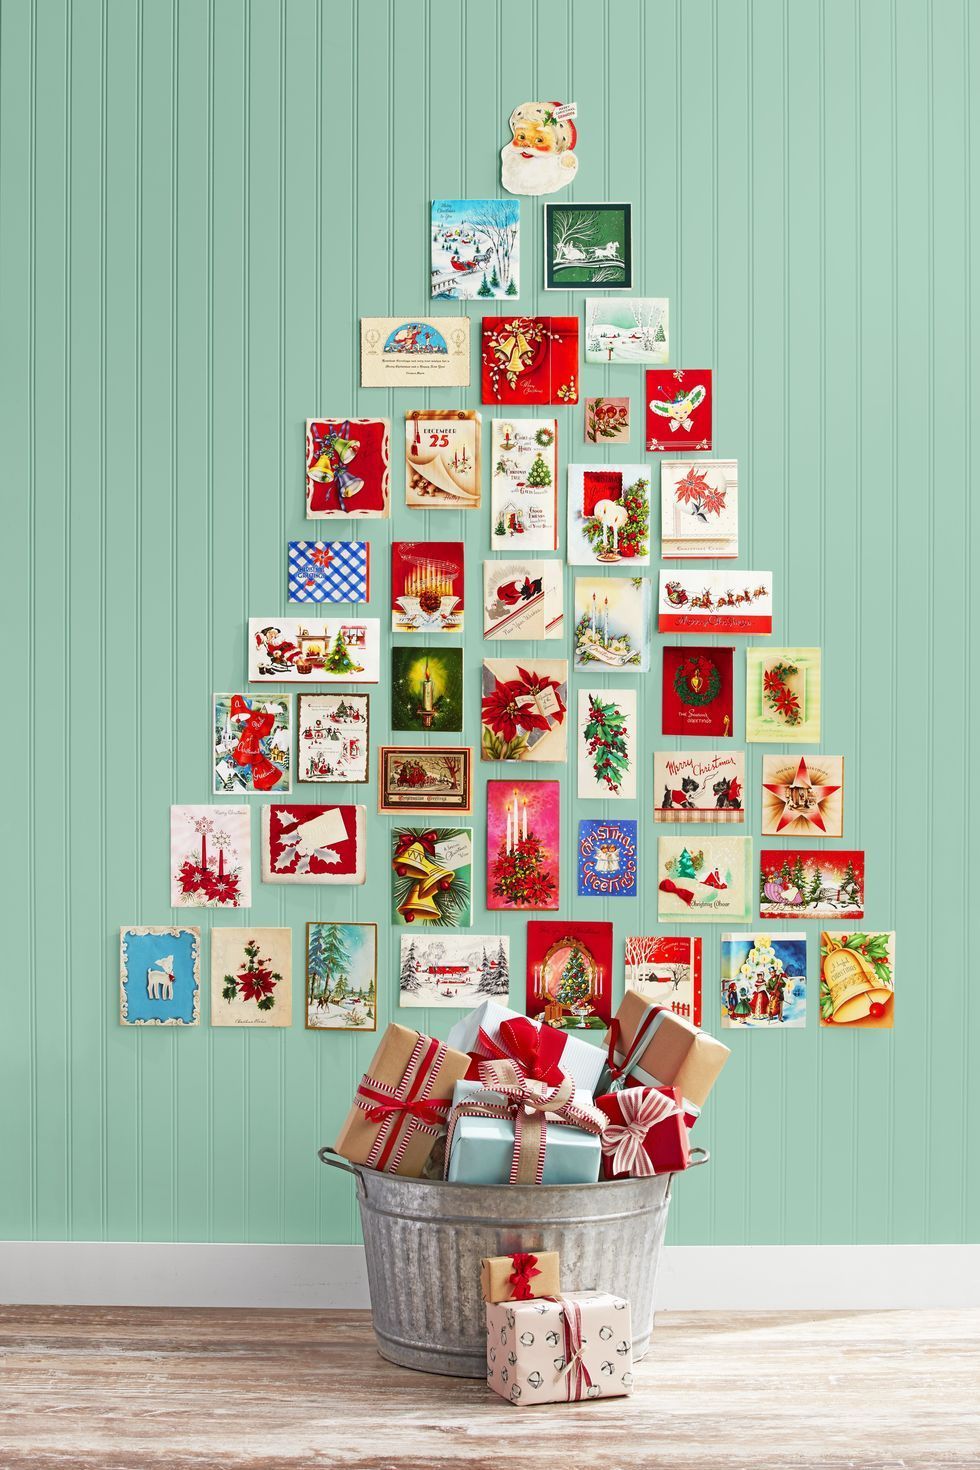 78 Diy Christmas Crafts 2020 Easy Holiday Craft Ideas For Kids And Adults